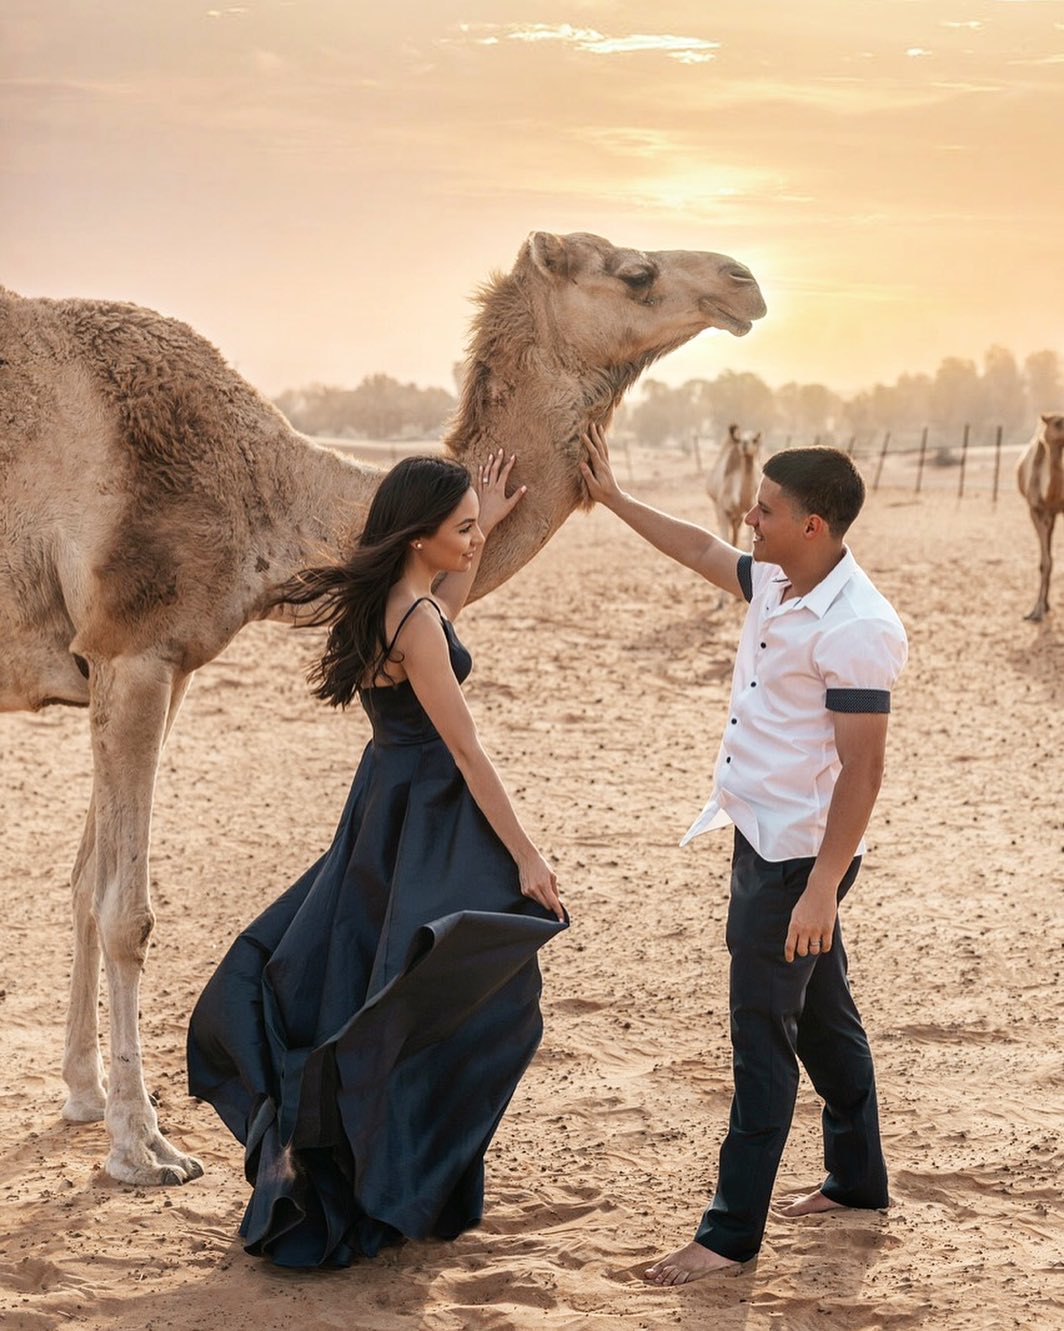 Book Signature Photography Tours In Dubai & Abu Dhabi. Feel The Unique Arabic Atmosphere By Visiting Top Photo Locations In UAE With Professional Photographer. 